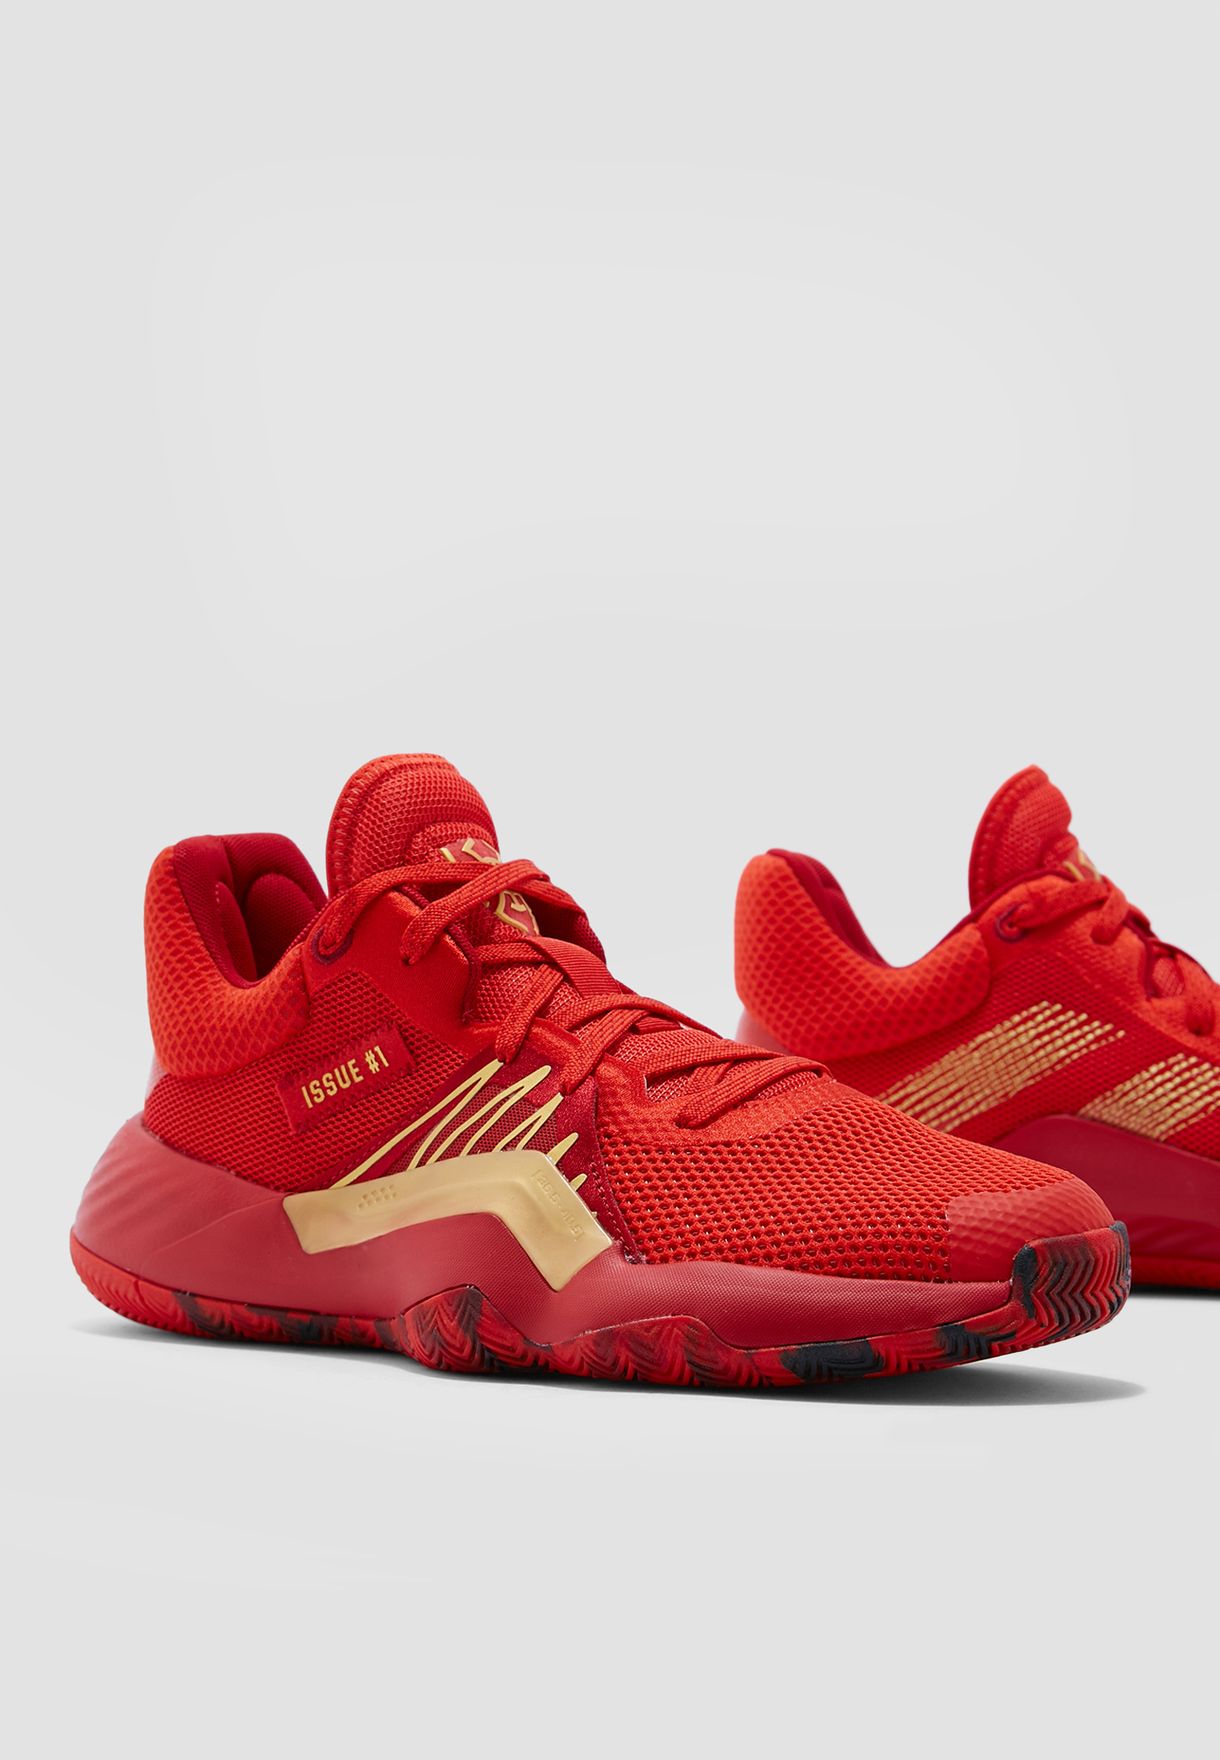 adidas don issue 1 red